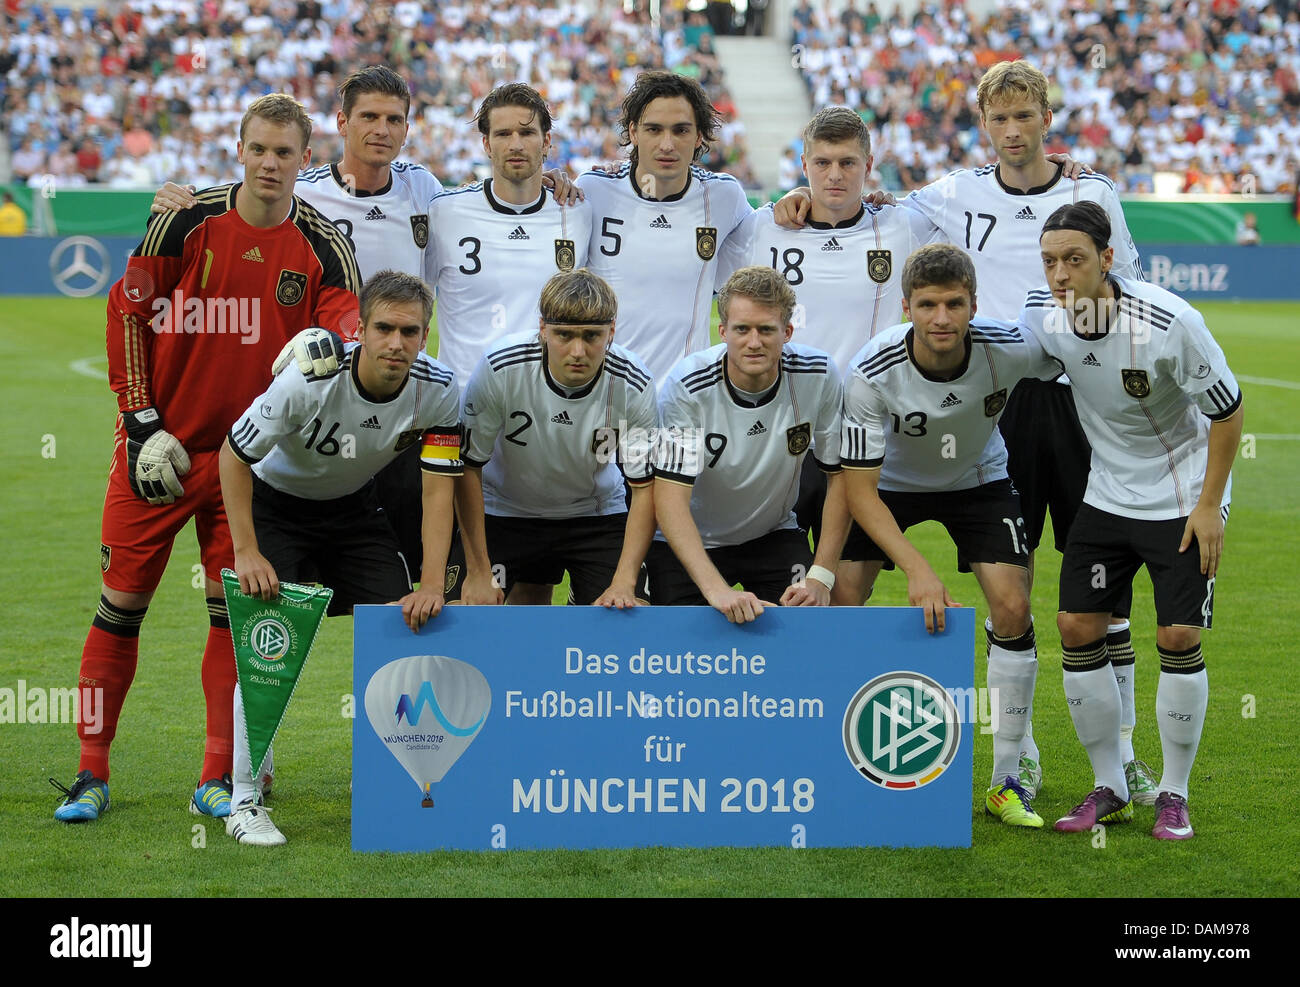 Germany's players (top left to bottom right) Manuel Neuer, Mario Gomez, Arne Friedrich, Mats Hummels, Toni Kroos, Simon Rolfes, Philipp Lahm, Marcel Schmelzer, Andre Schürrle, Thomas Müller and Mesut Oezil pose for a teaqm photo prior to their soccer friendly match Germany vs. Uruguay at Rhein-Neckar-Arena stadium in Sinsheim, Germany, 29 May 2011. Photo: Ronald Wittek Stock Photo